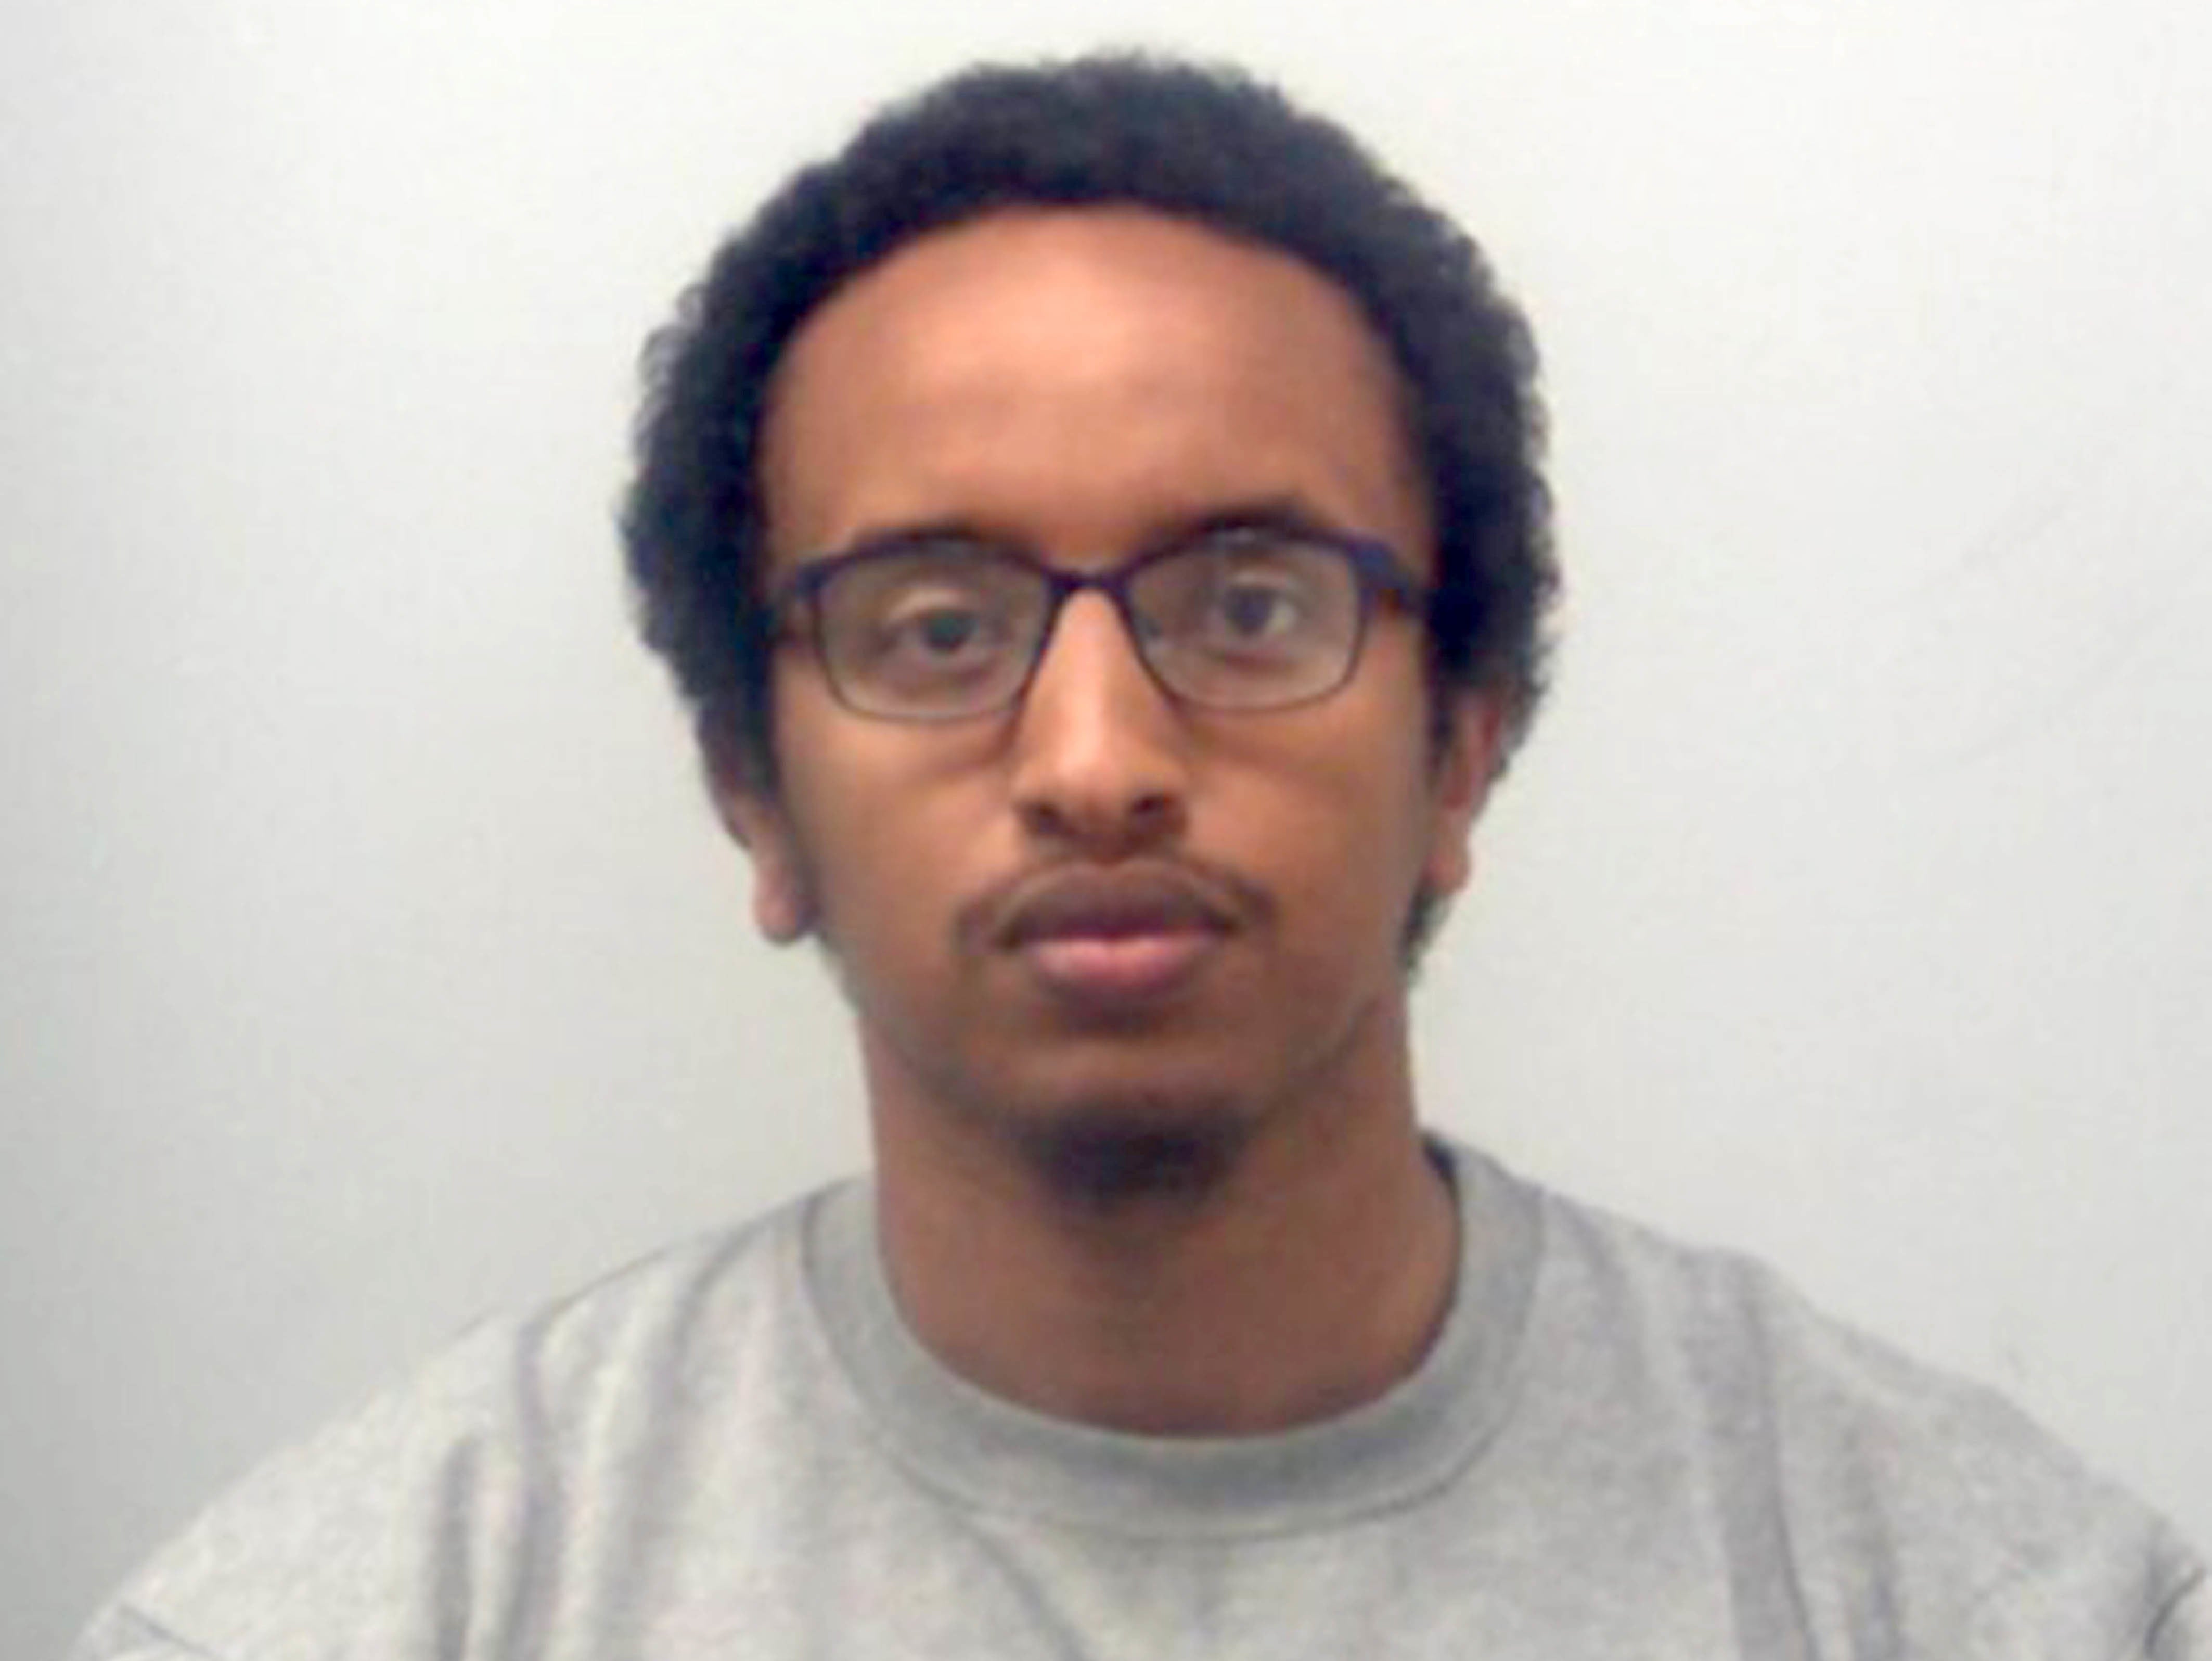 Ali Harbi Ali, 26, who has been found guilty at the Old Bailey of murdering Conservative MP Sir David